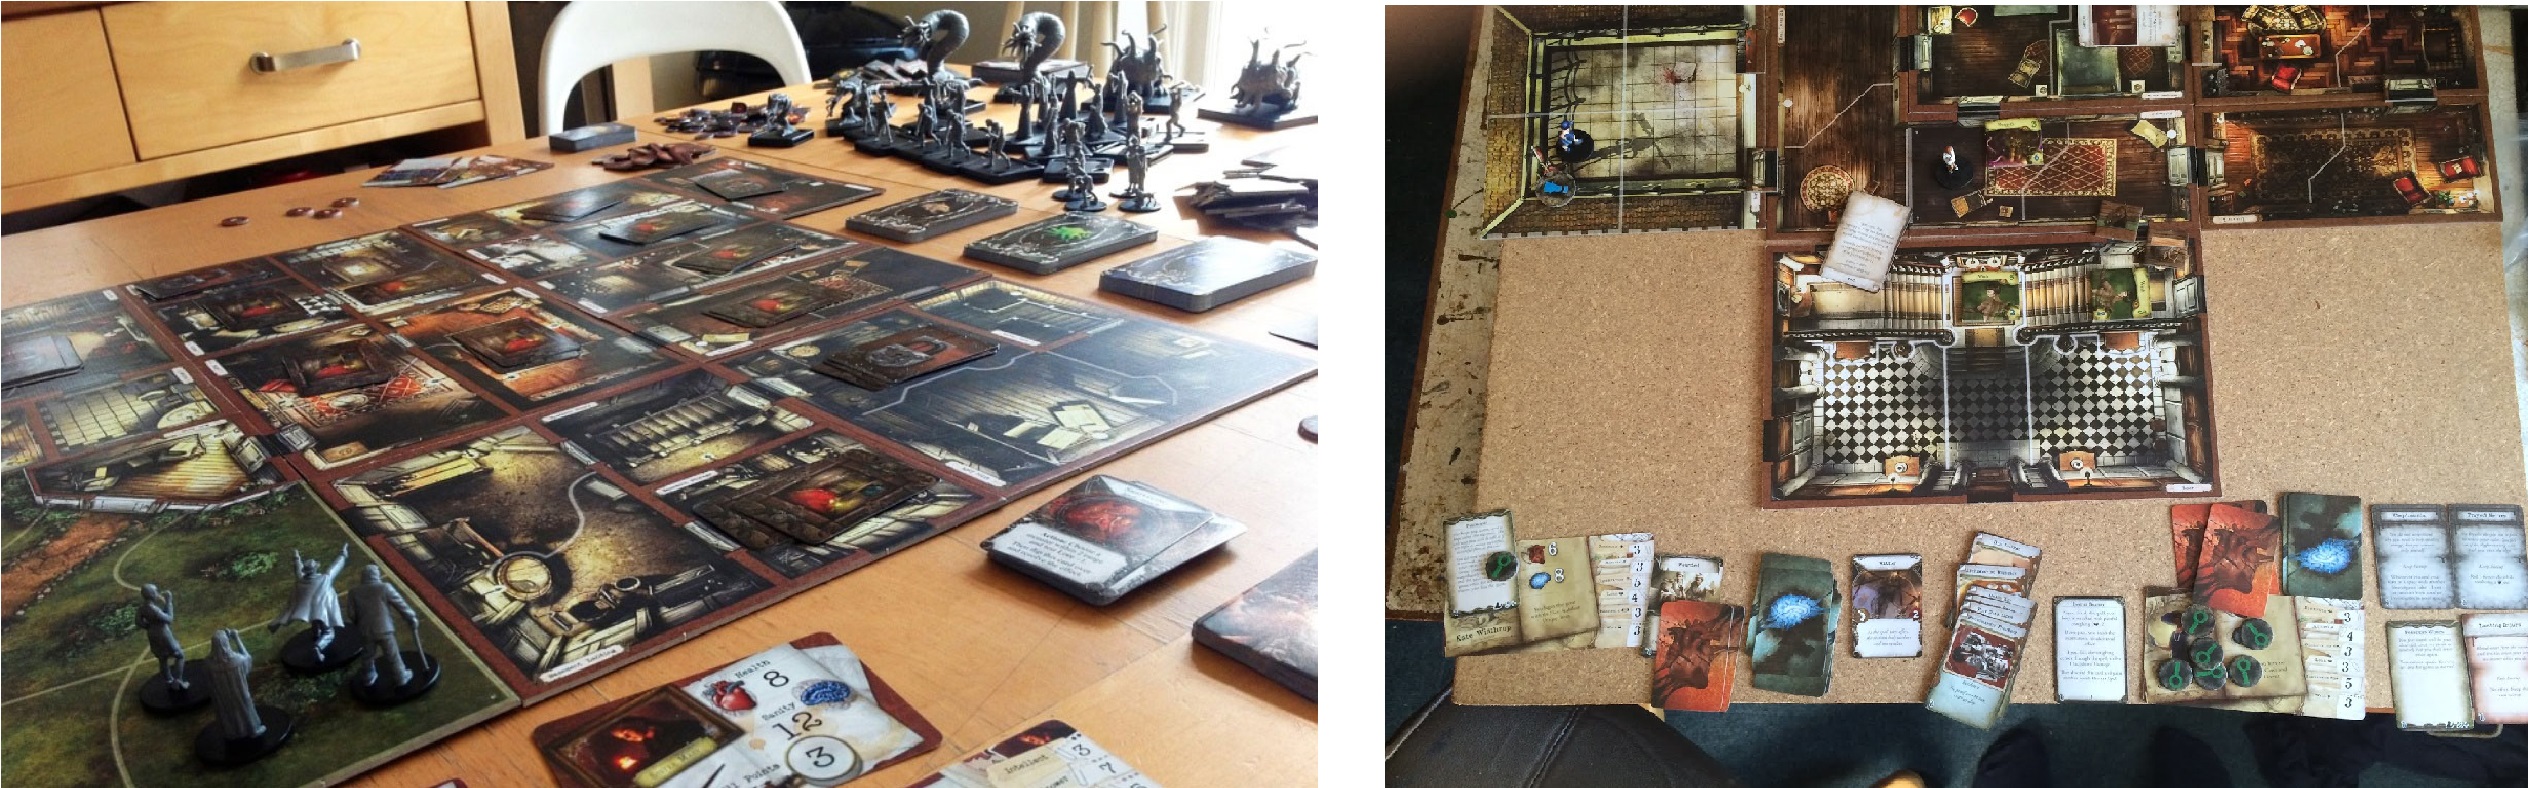 mansions-of-madness-table-comparison